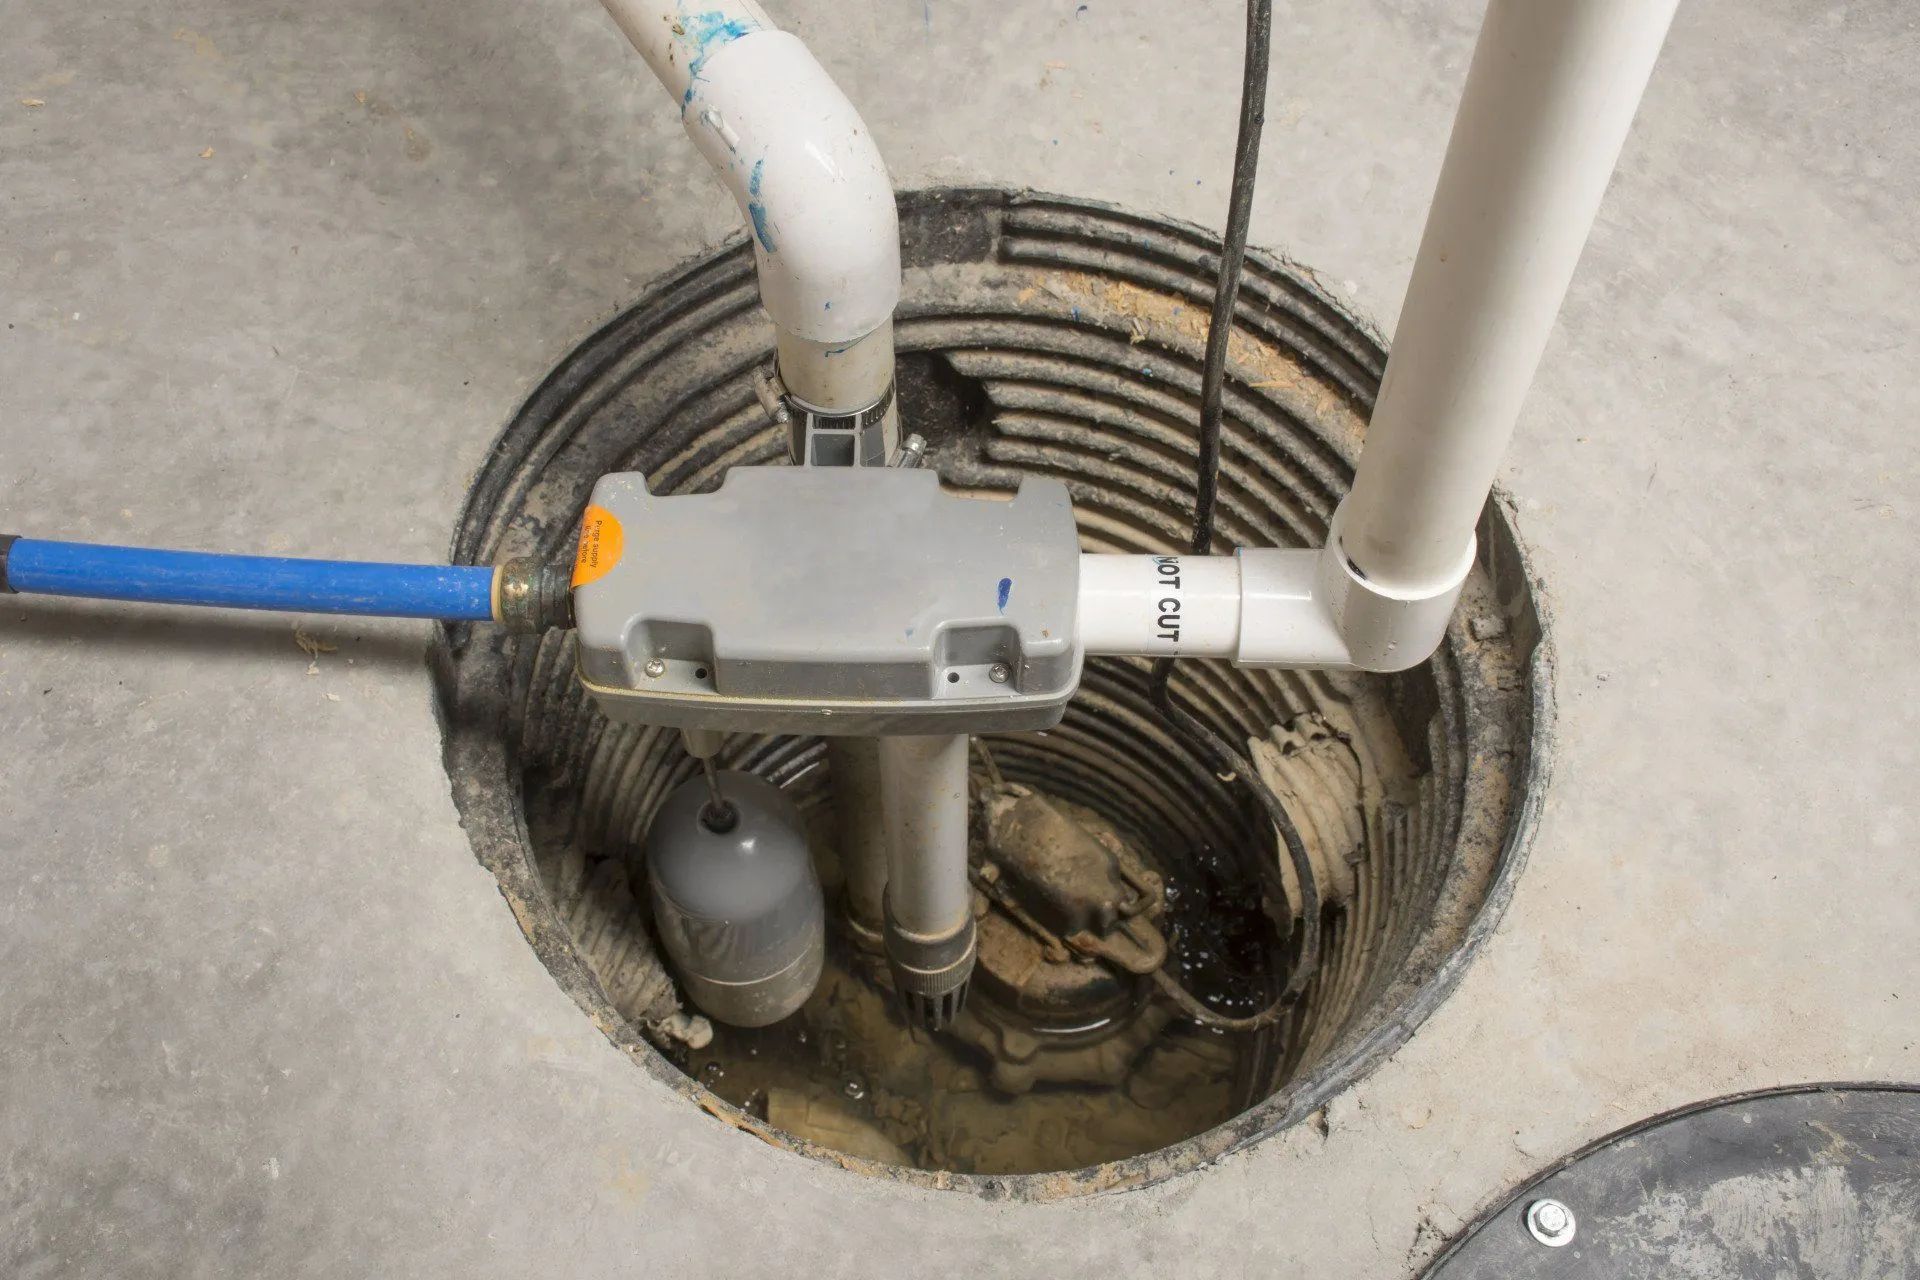 How Often Should I Get My Sump Pump Cleaned?